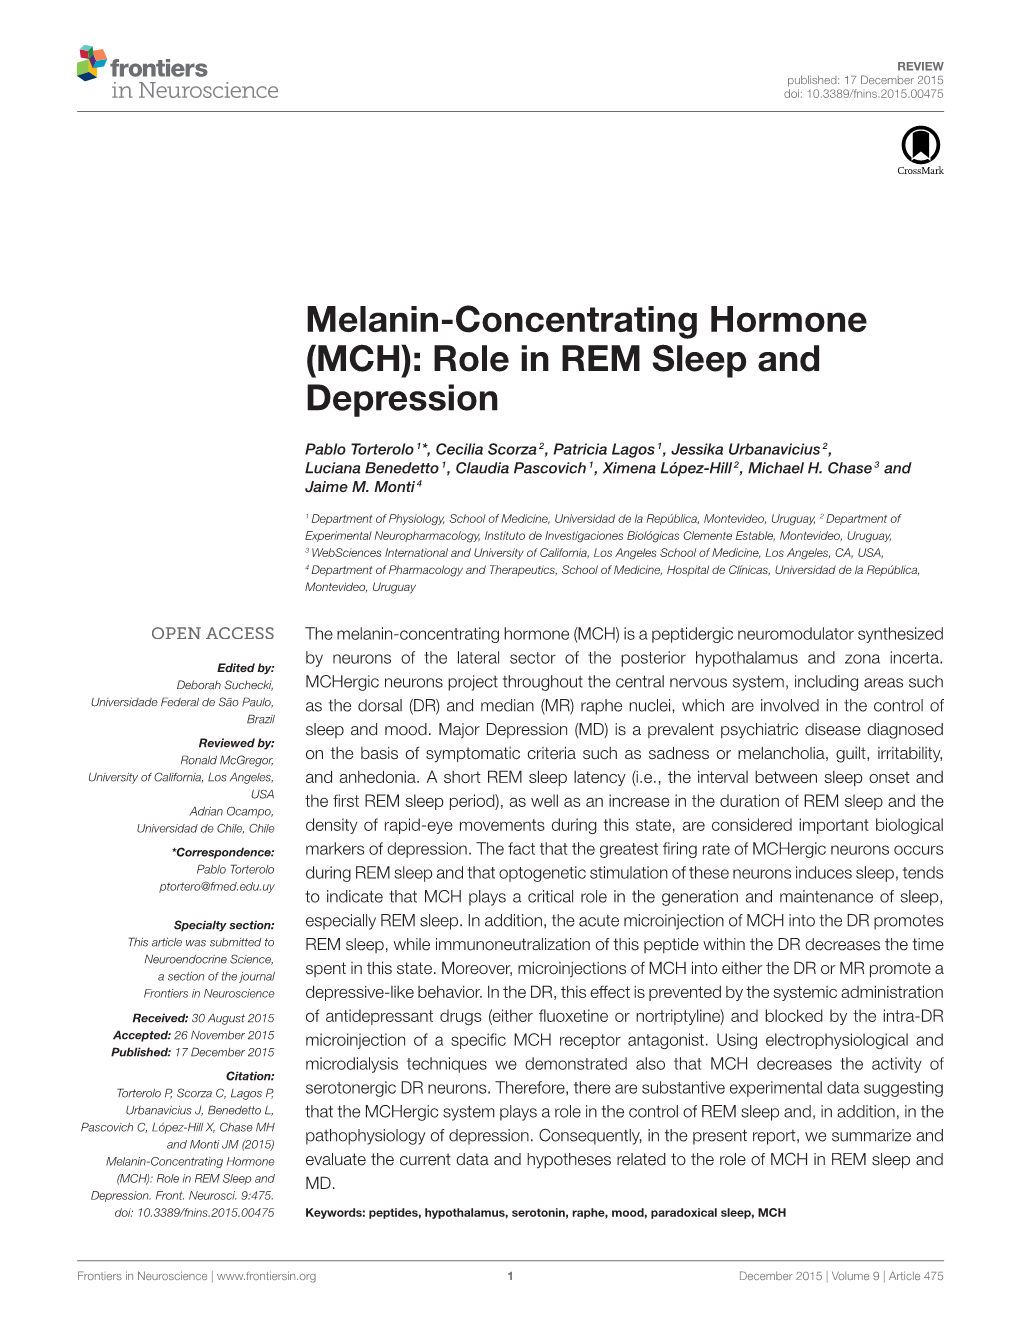 (MCH): Role in REM Sleep and Depression